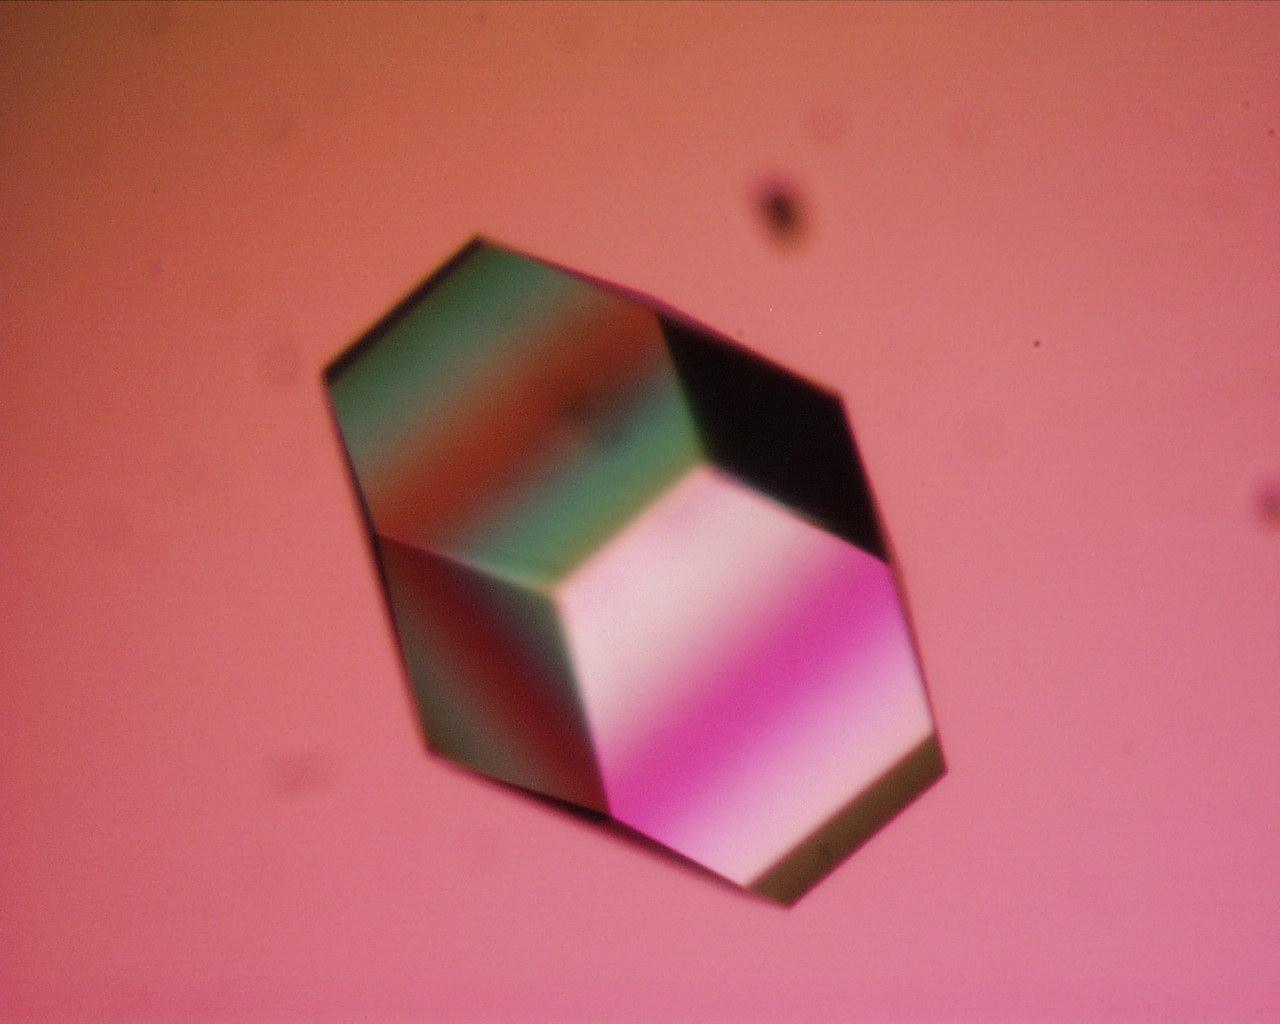 http://upload.wikimedia.org/wikipedia/commons/6/6a/Lysozyme_crystal1.JPG